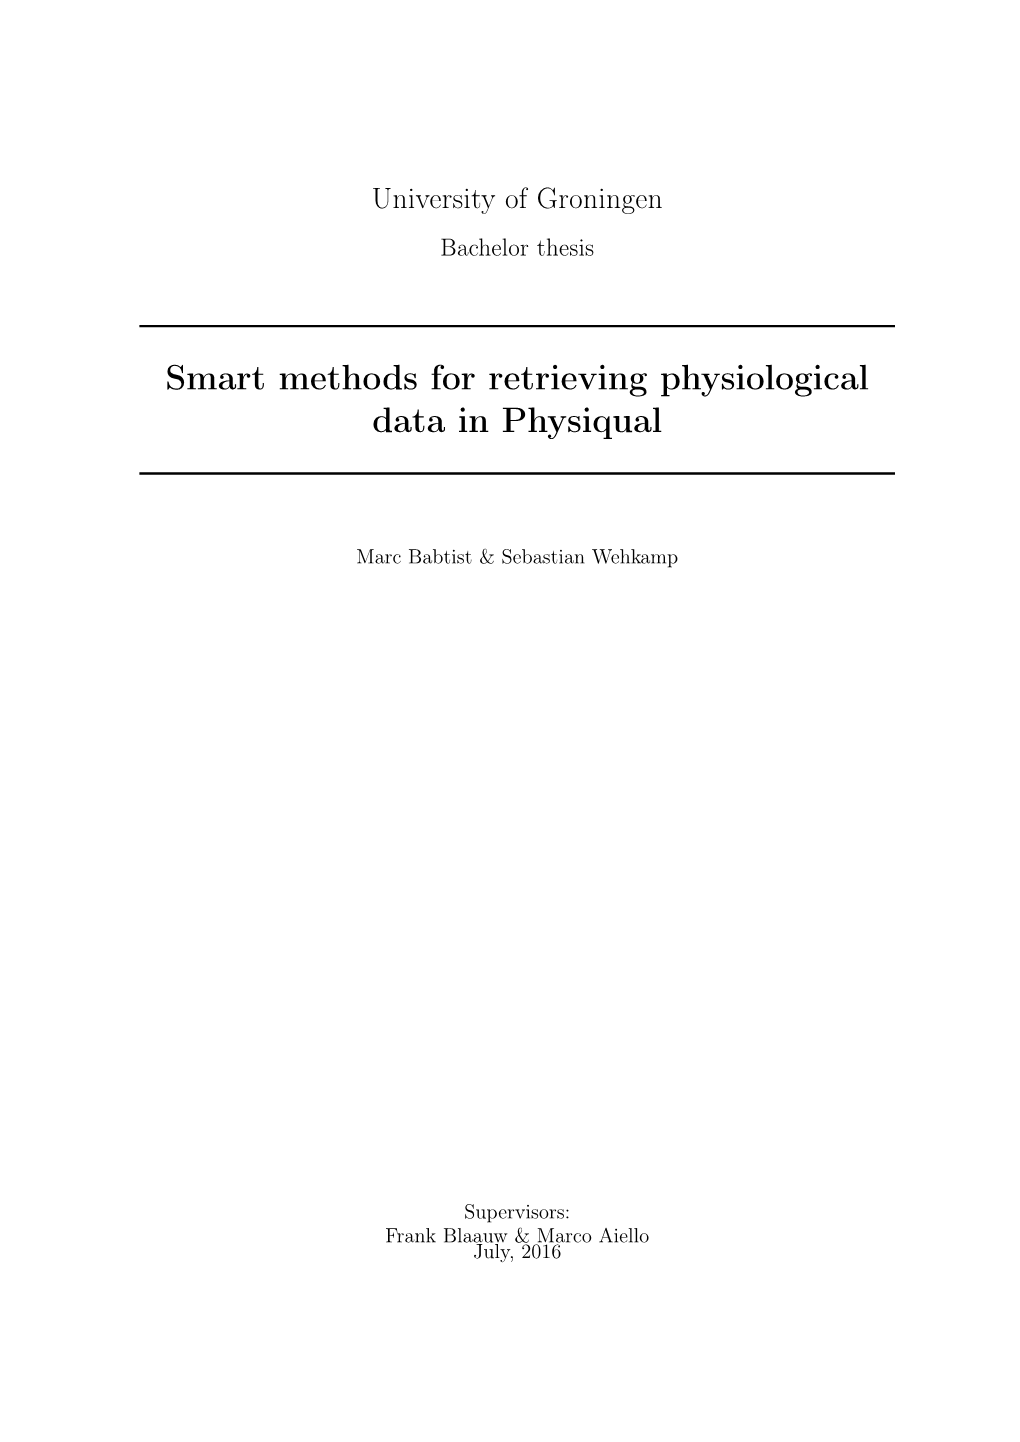 Smart Methods for Retrieving Physiological Data in Physiqual